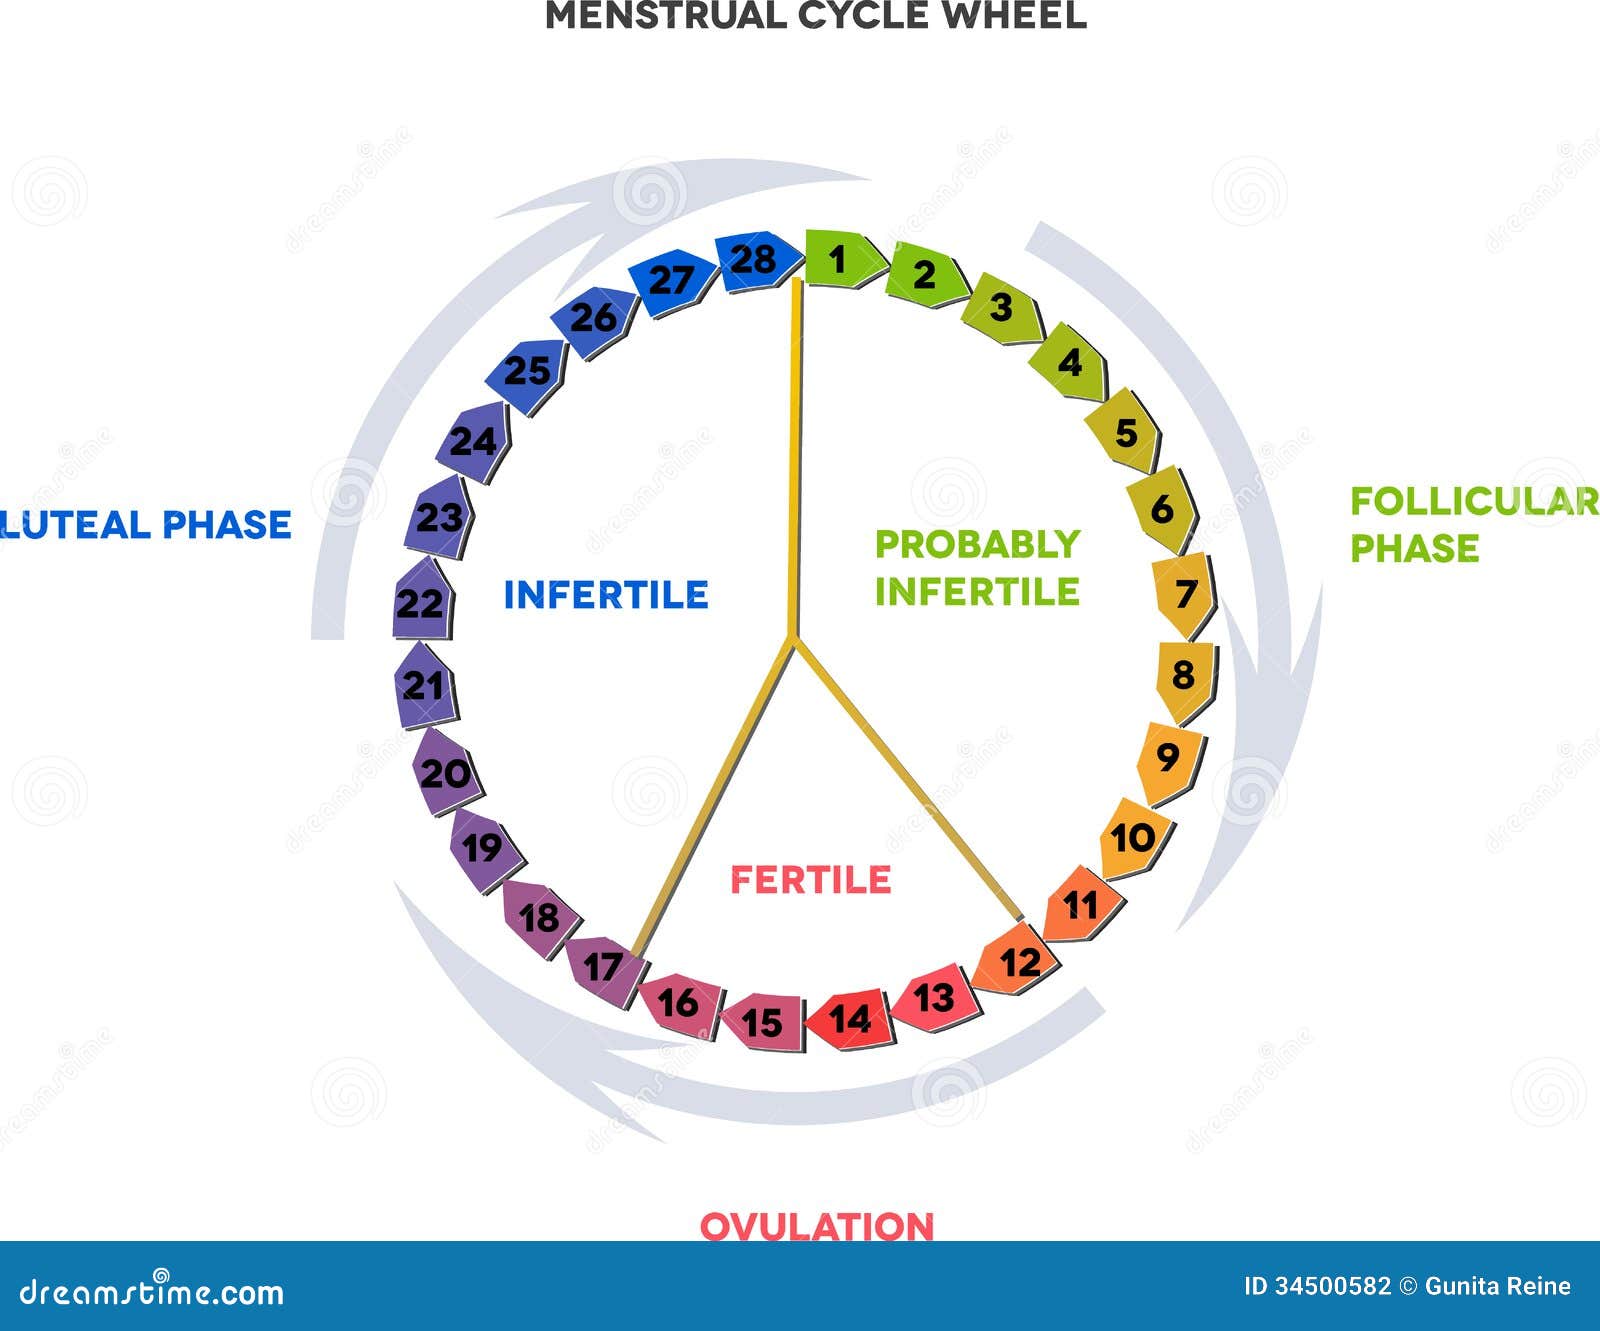 Menstrual Cycle Diagram With Ovulation